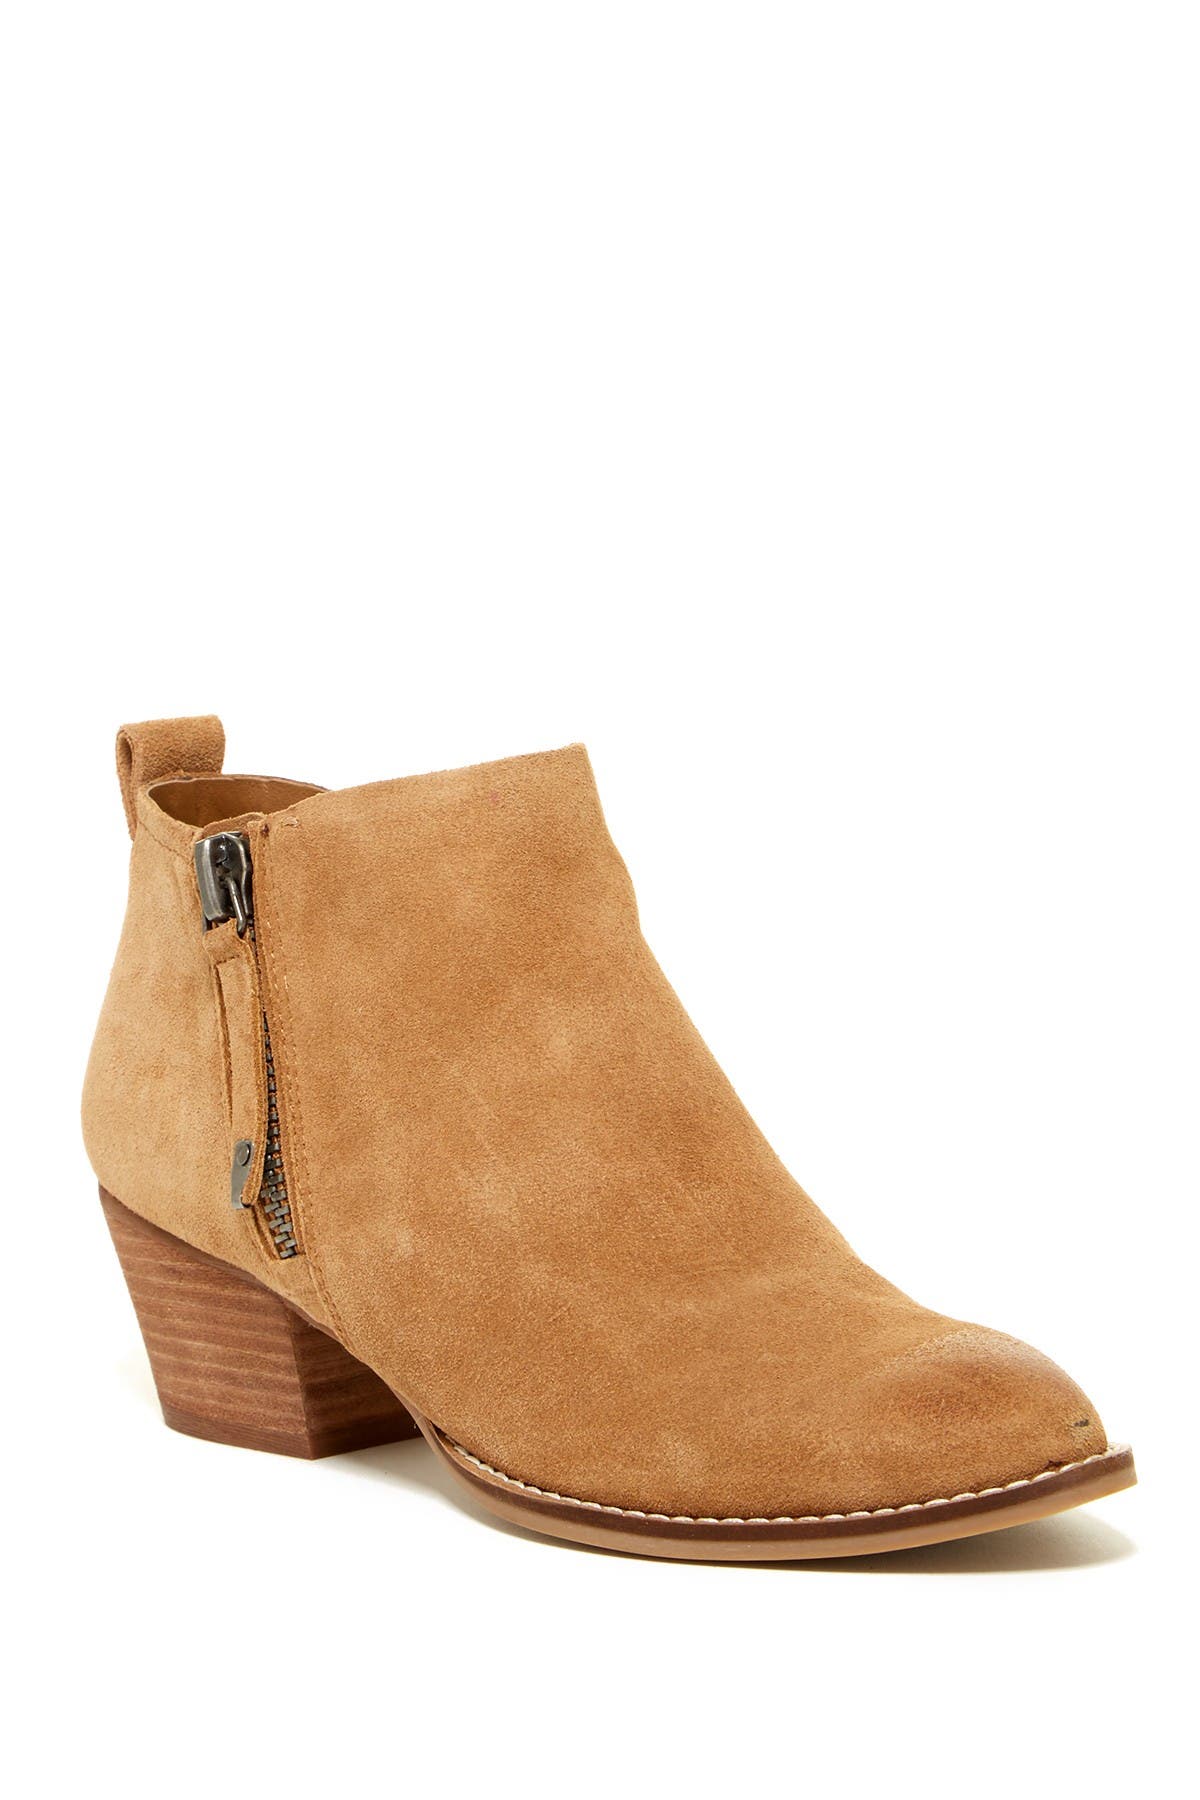 dolce vita ankle boots nordstrom